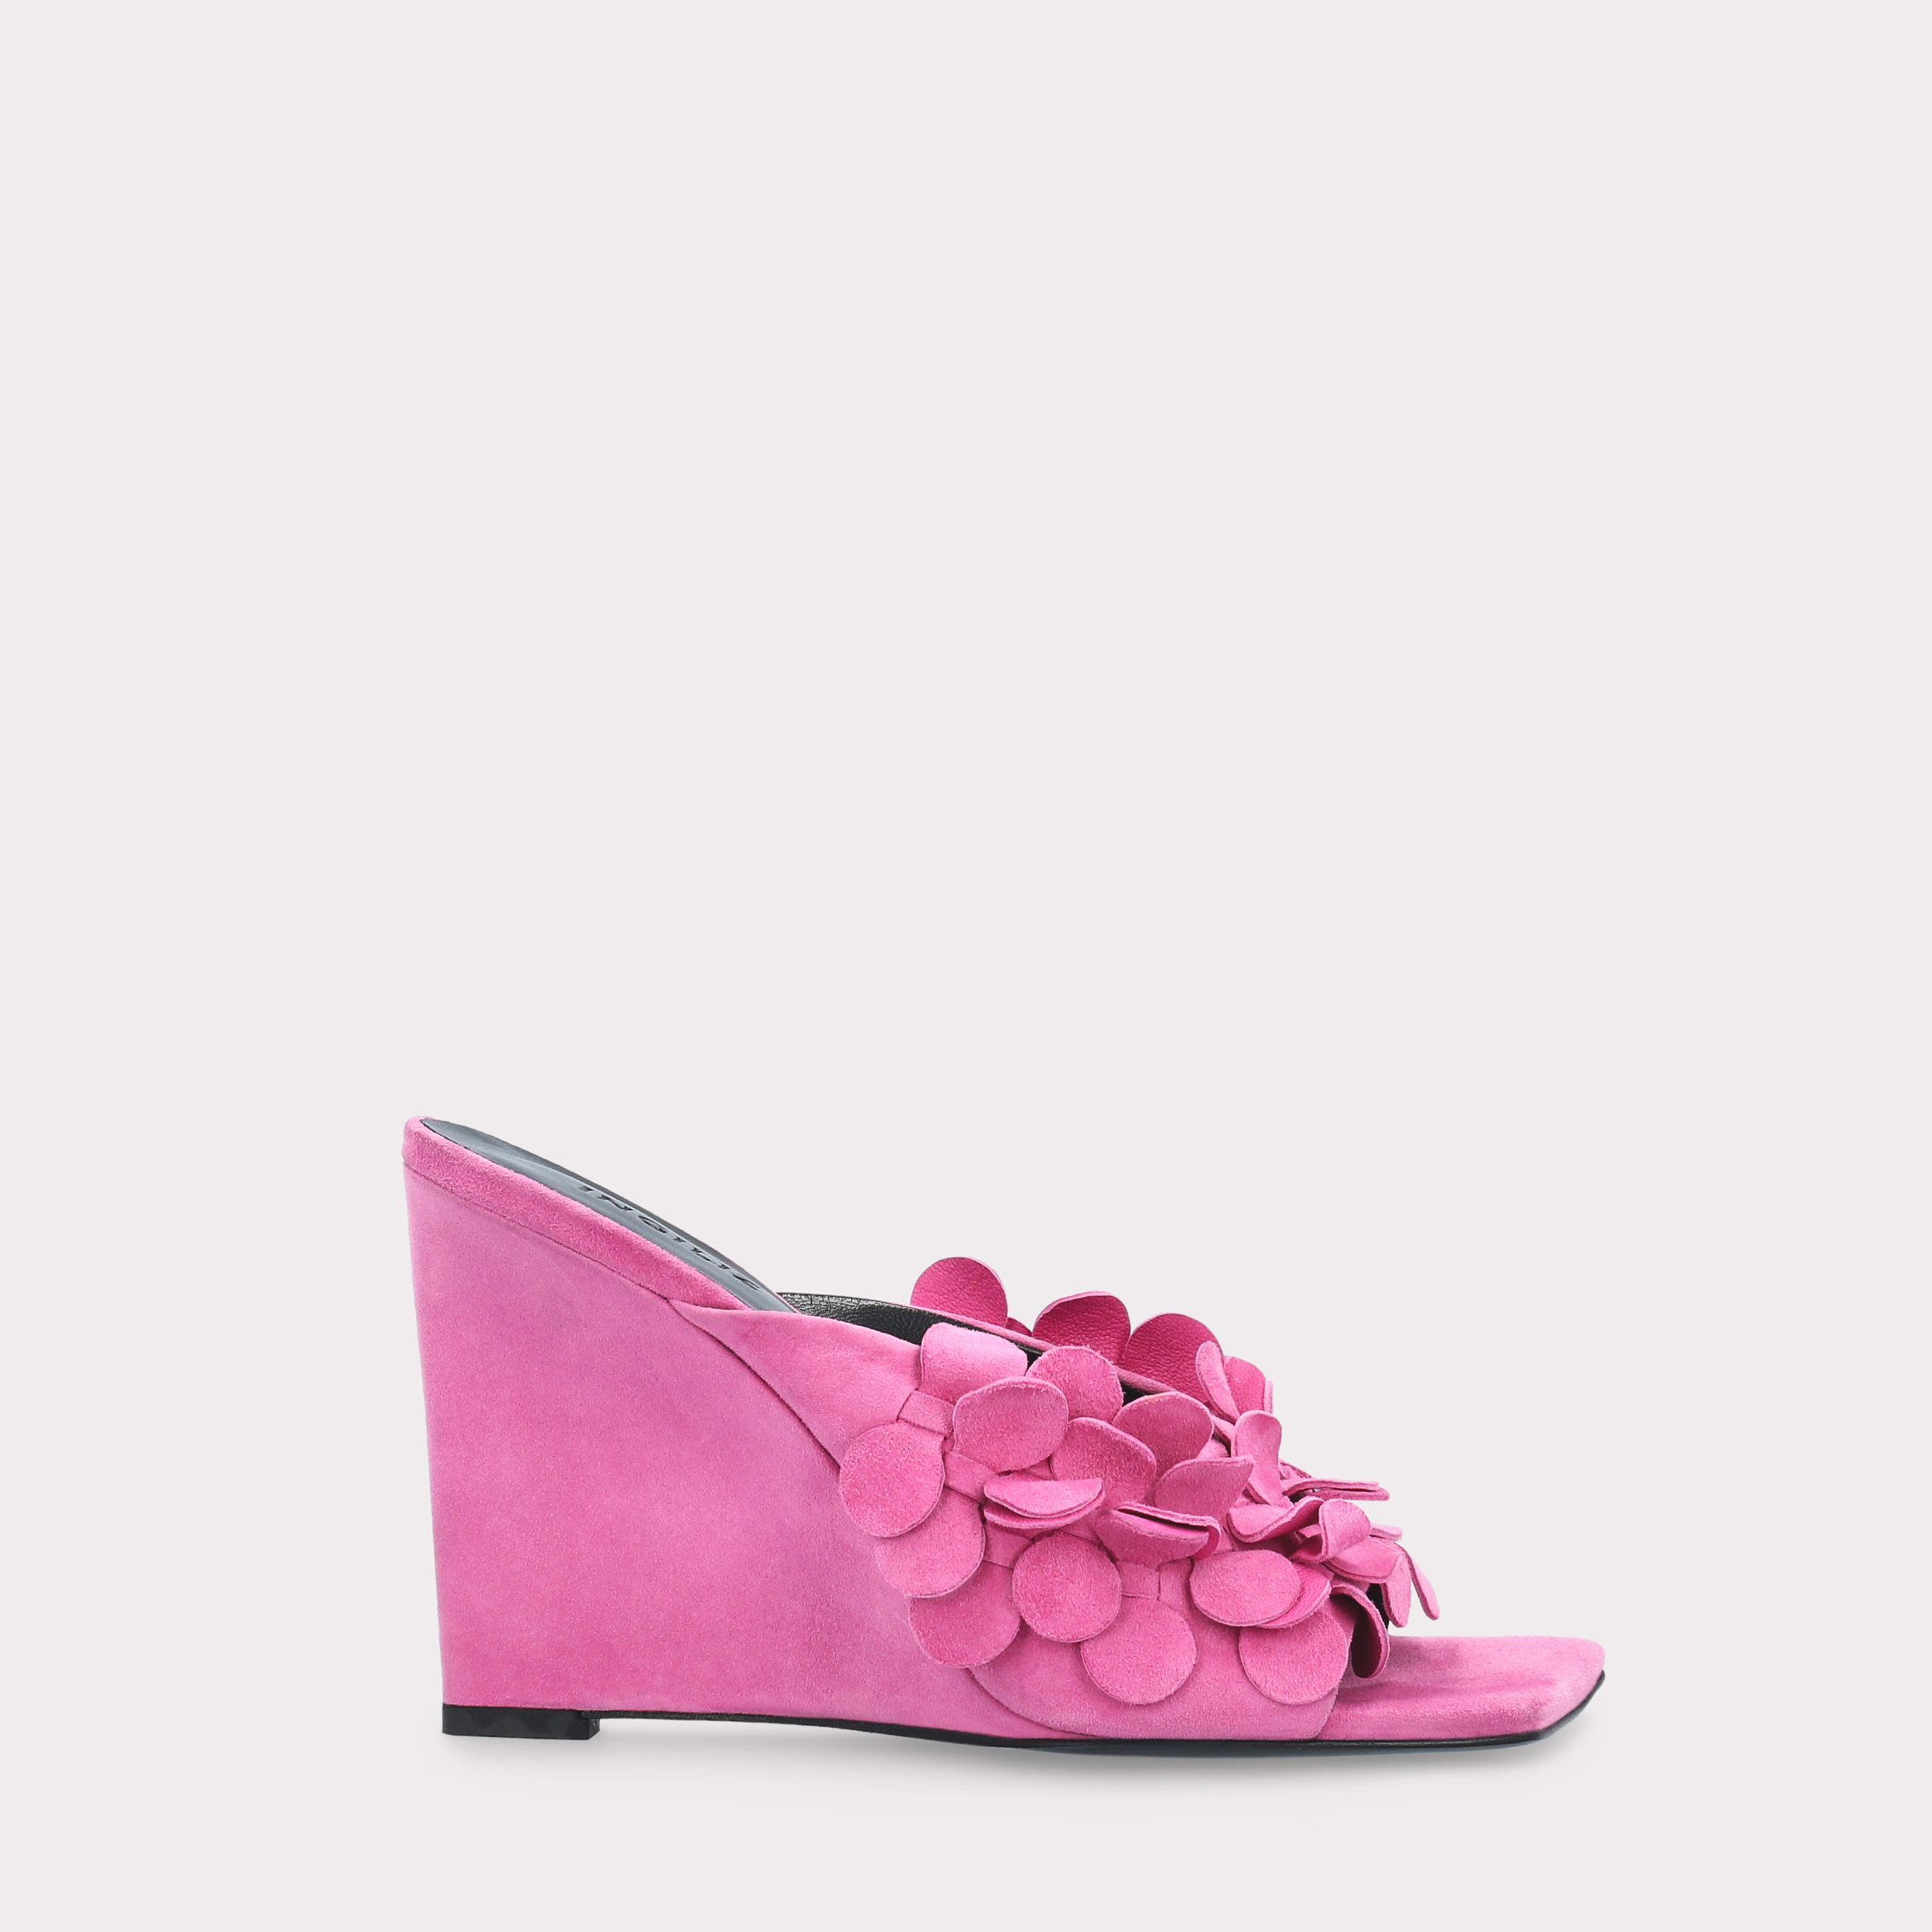 ZILLY 01 FUCHSIA SUEDE LEATHER MULES